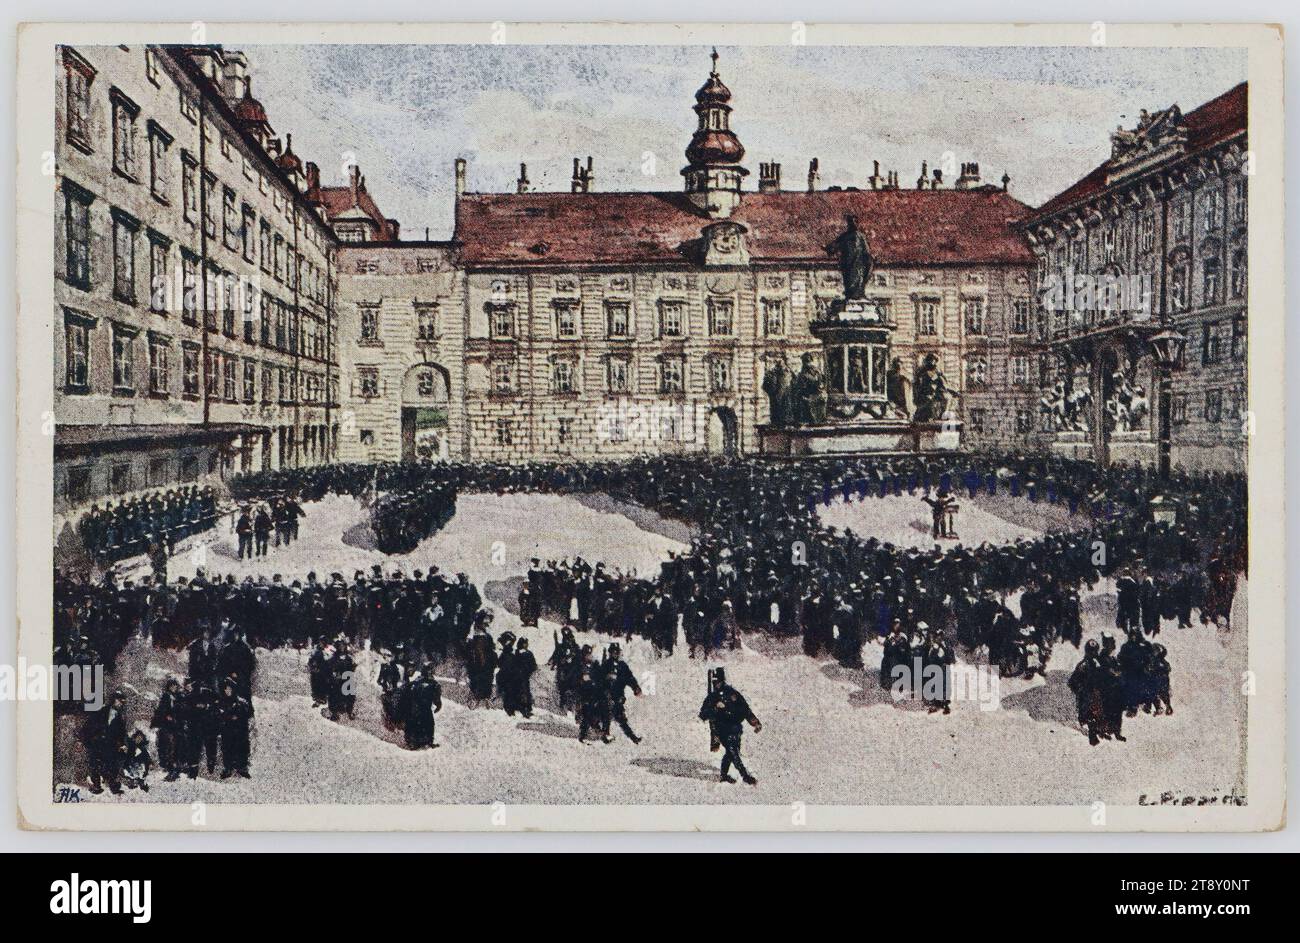 Vienna. - Burgplatz with changing of the guard, 1912, coated paperboard, halftone print, height×width: ca. 9×14 cm, Inscription, FROM, Vienna, TO, Krumbach, ADDRESS, An Wohlgeborene, Frau, [..][..], Gutsbesitzers-Gattin [..], Krumbach, bei Edlitz, a.d. Aspangbahn, MESSAGE, Dear Madam, If it is nice on Friday and we are not inconvenient for you, we want to keep our promise and come to Krumbach, since Hans still likes to come with us and Saturday already has to go to Kalksburg, However, if you prefer next week, please write to me in Seebenstein Stock Photo